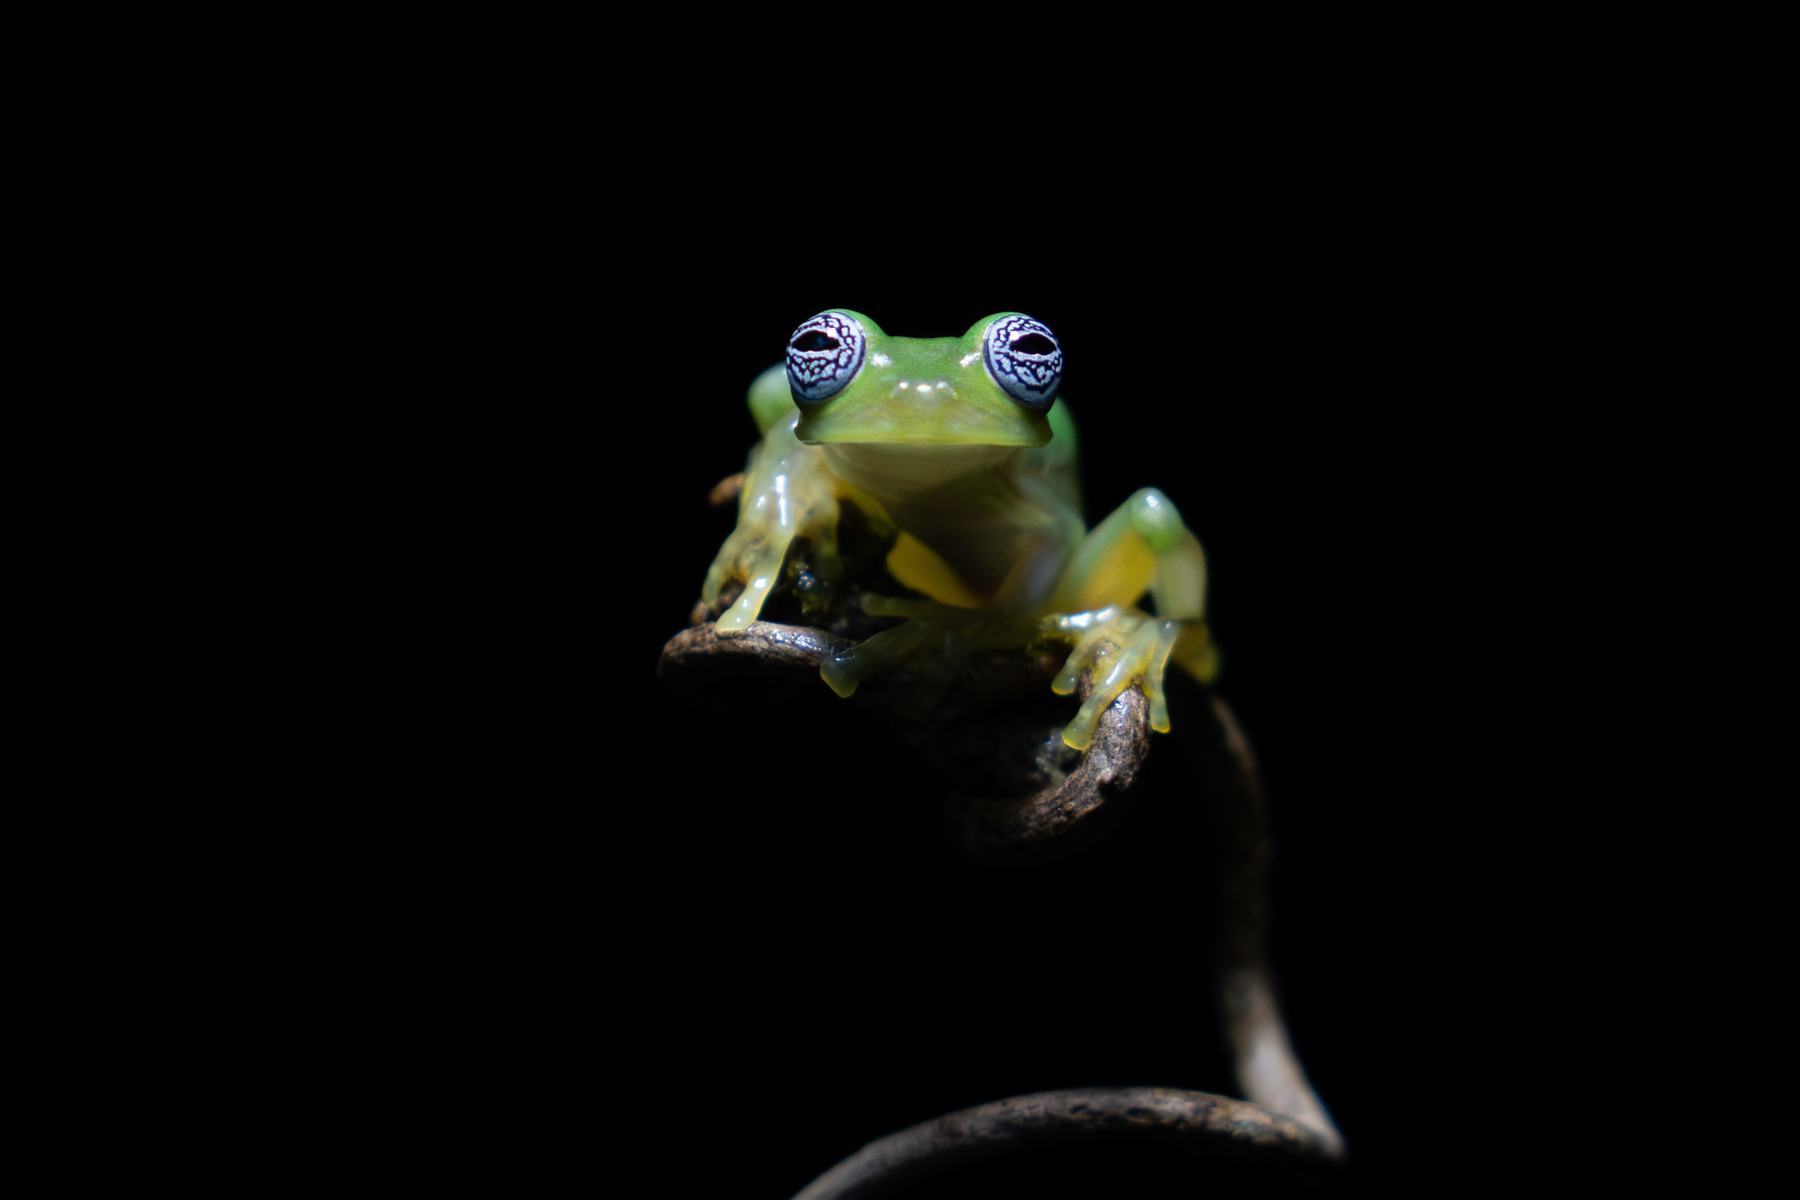 Ghost Glass Frog, one of the most difficult to find and photograph frogs in Costa Rica (image by Inger Vandyke)